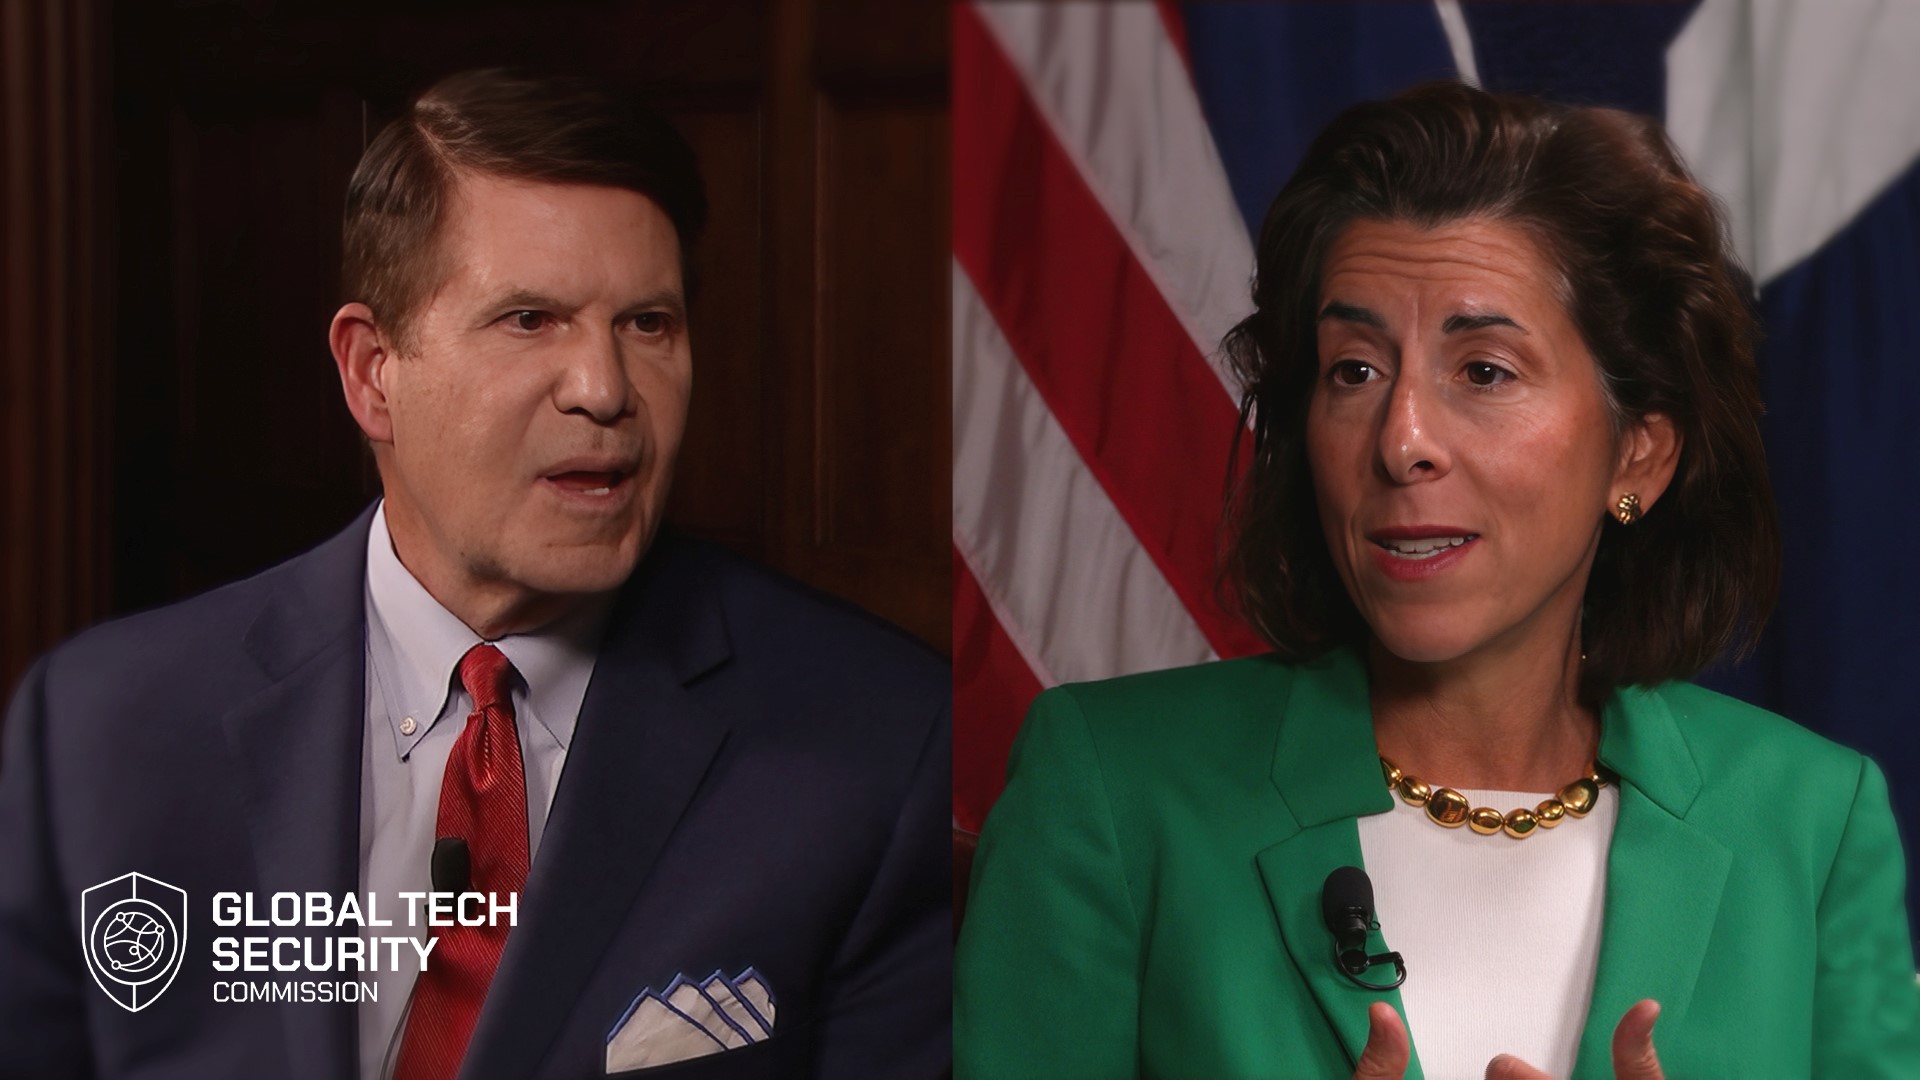 Commerce Secretary Gina Raimondo and Global Tech Security Commission Co-Chair Keith Krach Deliver Briefing on Advancing U.S. Technological Leadership